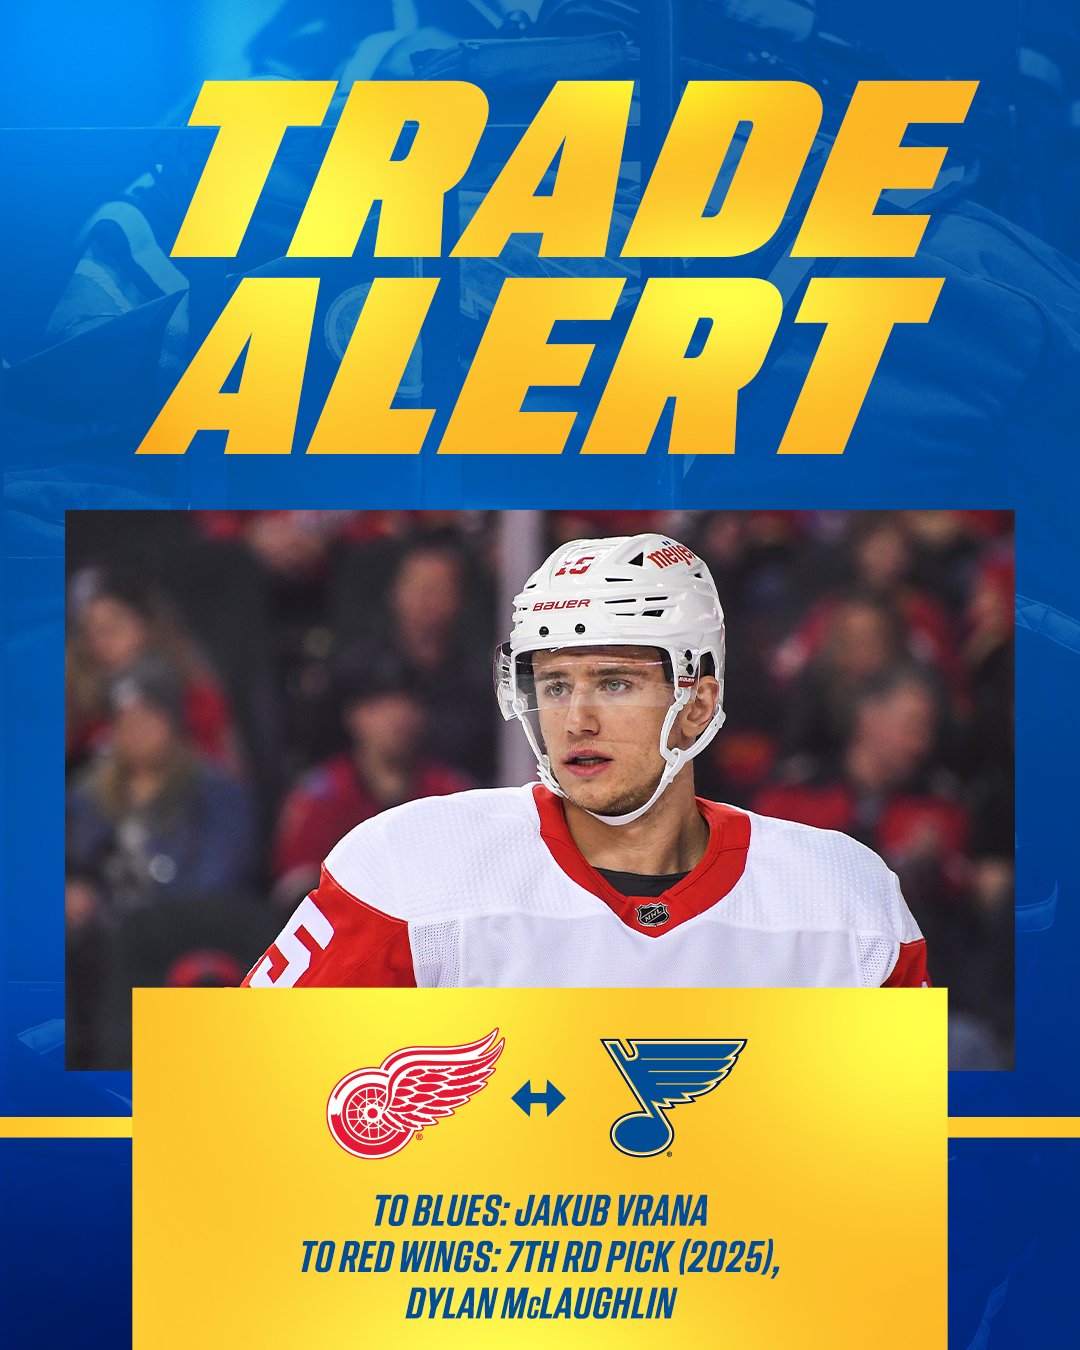 NHL - VRANA TO ST. LOUIS 🎶 The St. Louis Blues have acquired Jakub Vrana  in a deal with the Detroit Red Wings! #NHLTradeDeadline